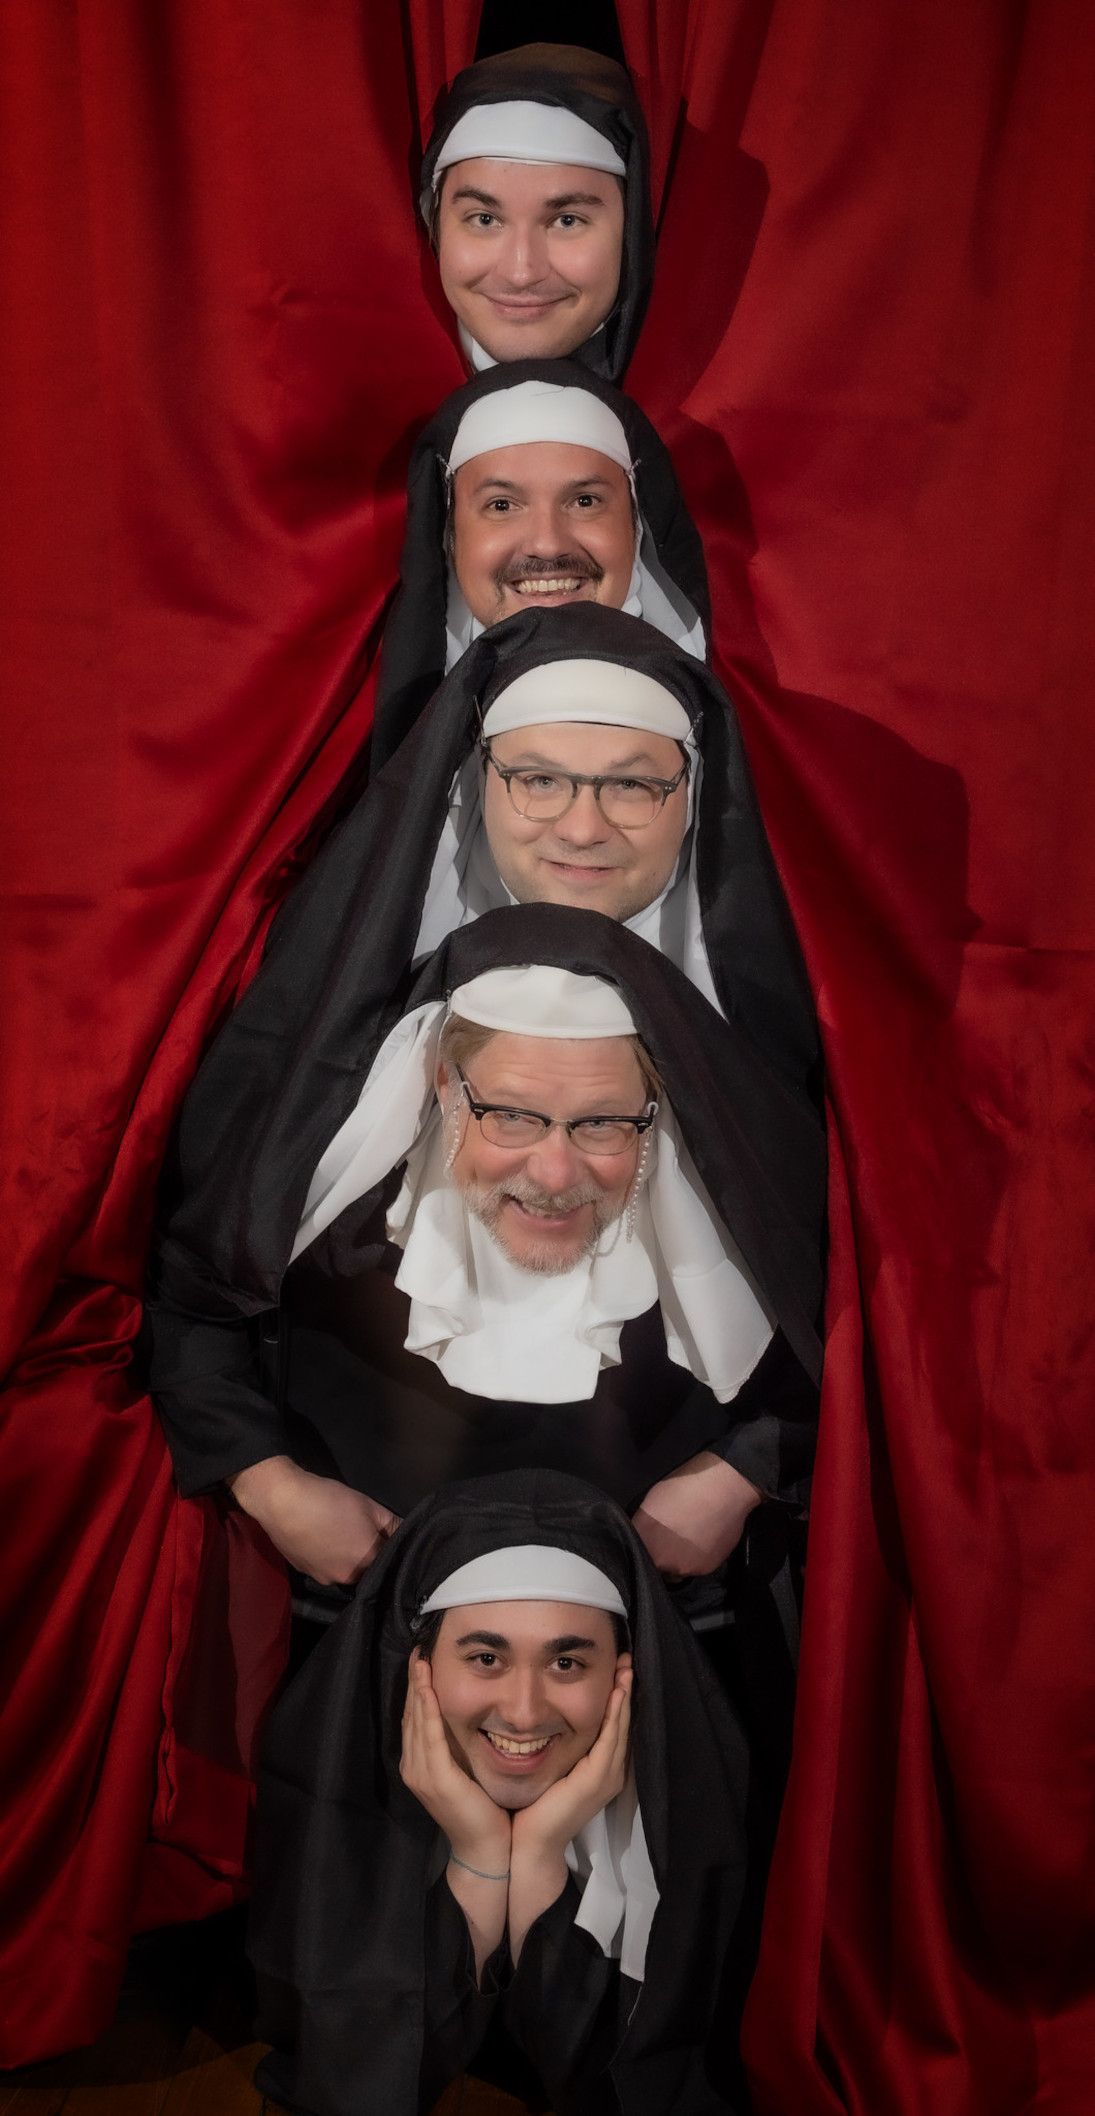 Play Bingo With Steel River’s Interesting-Looking Nuns